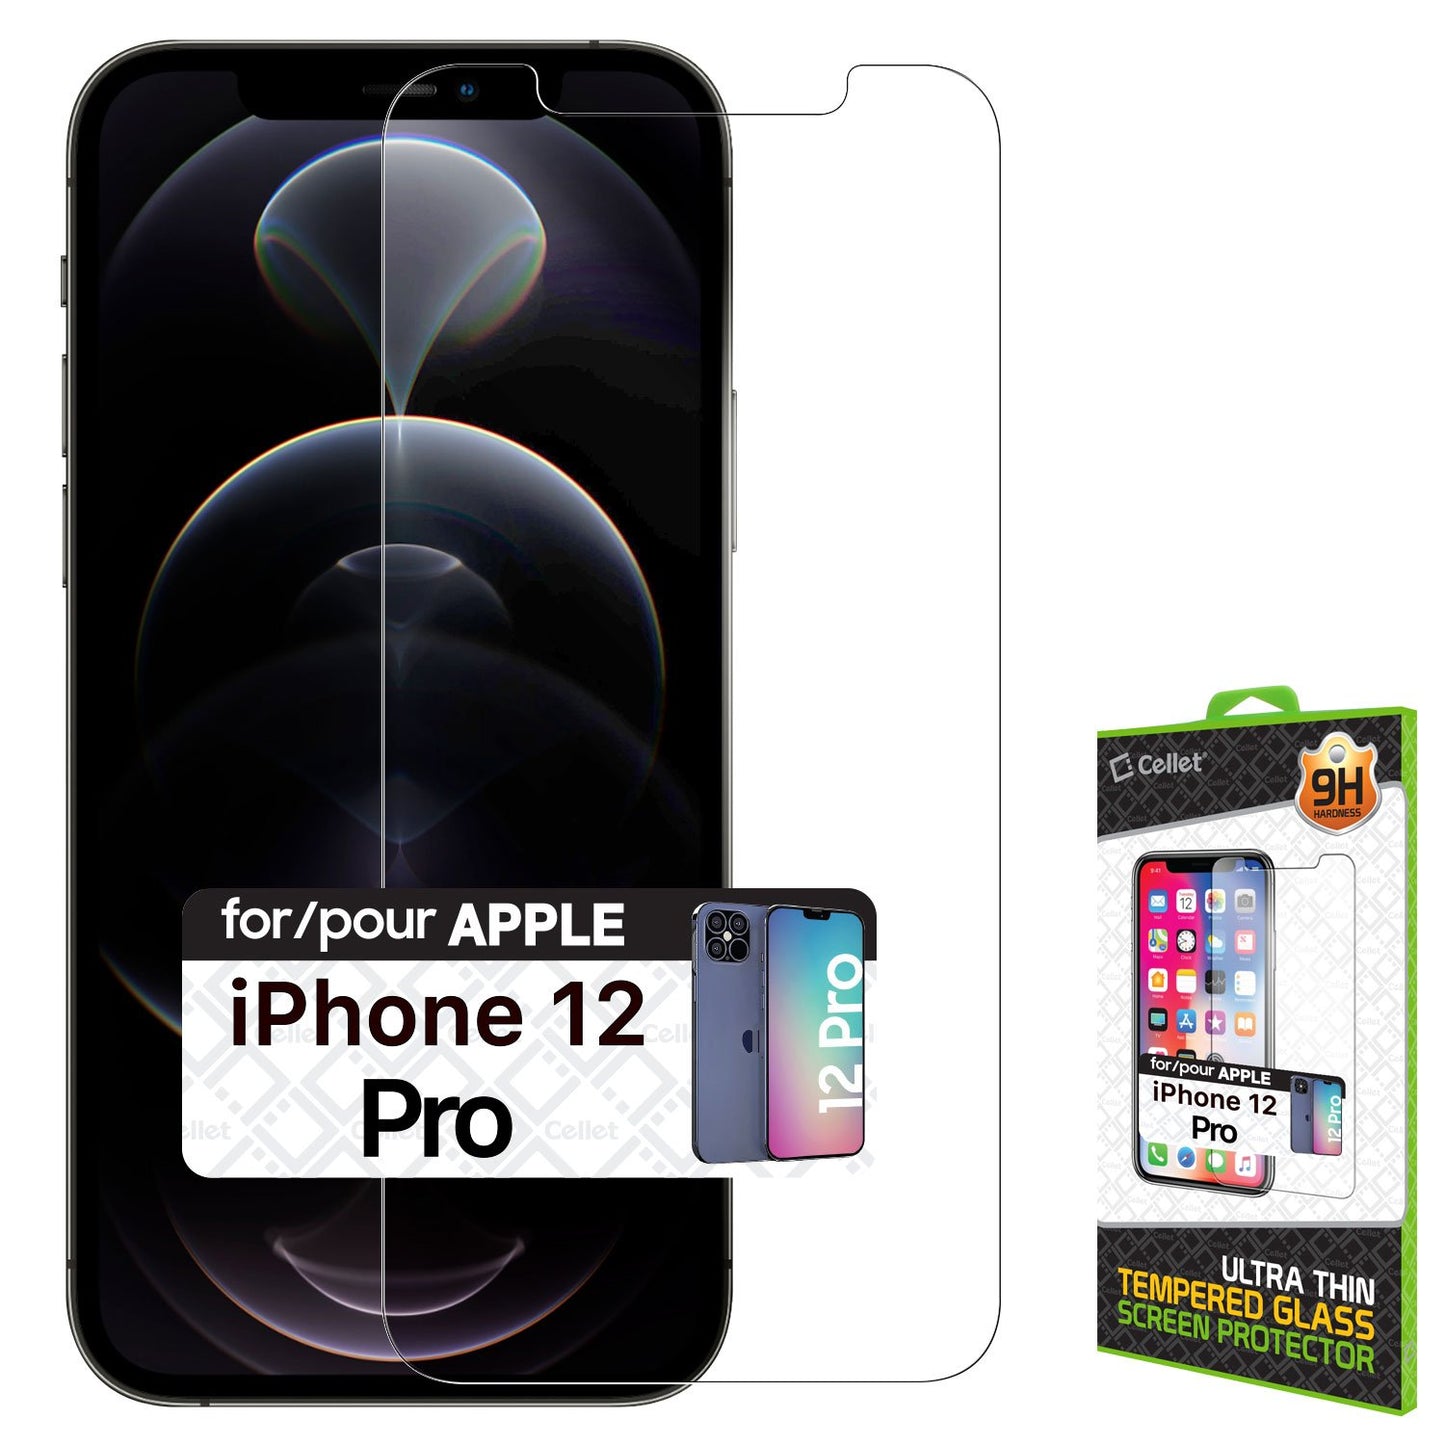 SGIPH12P - iPhone 12 & 12 Pro Tempered Glass Screen Protector, 9H Hardness